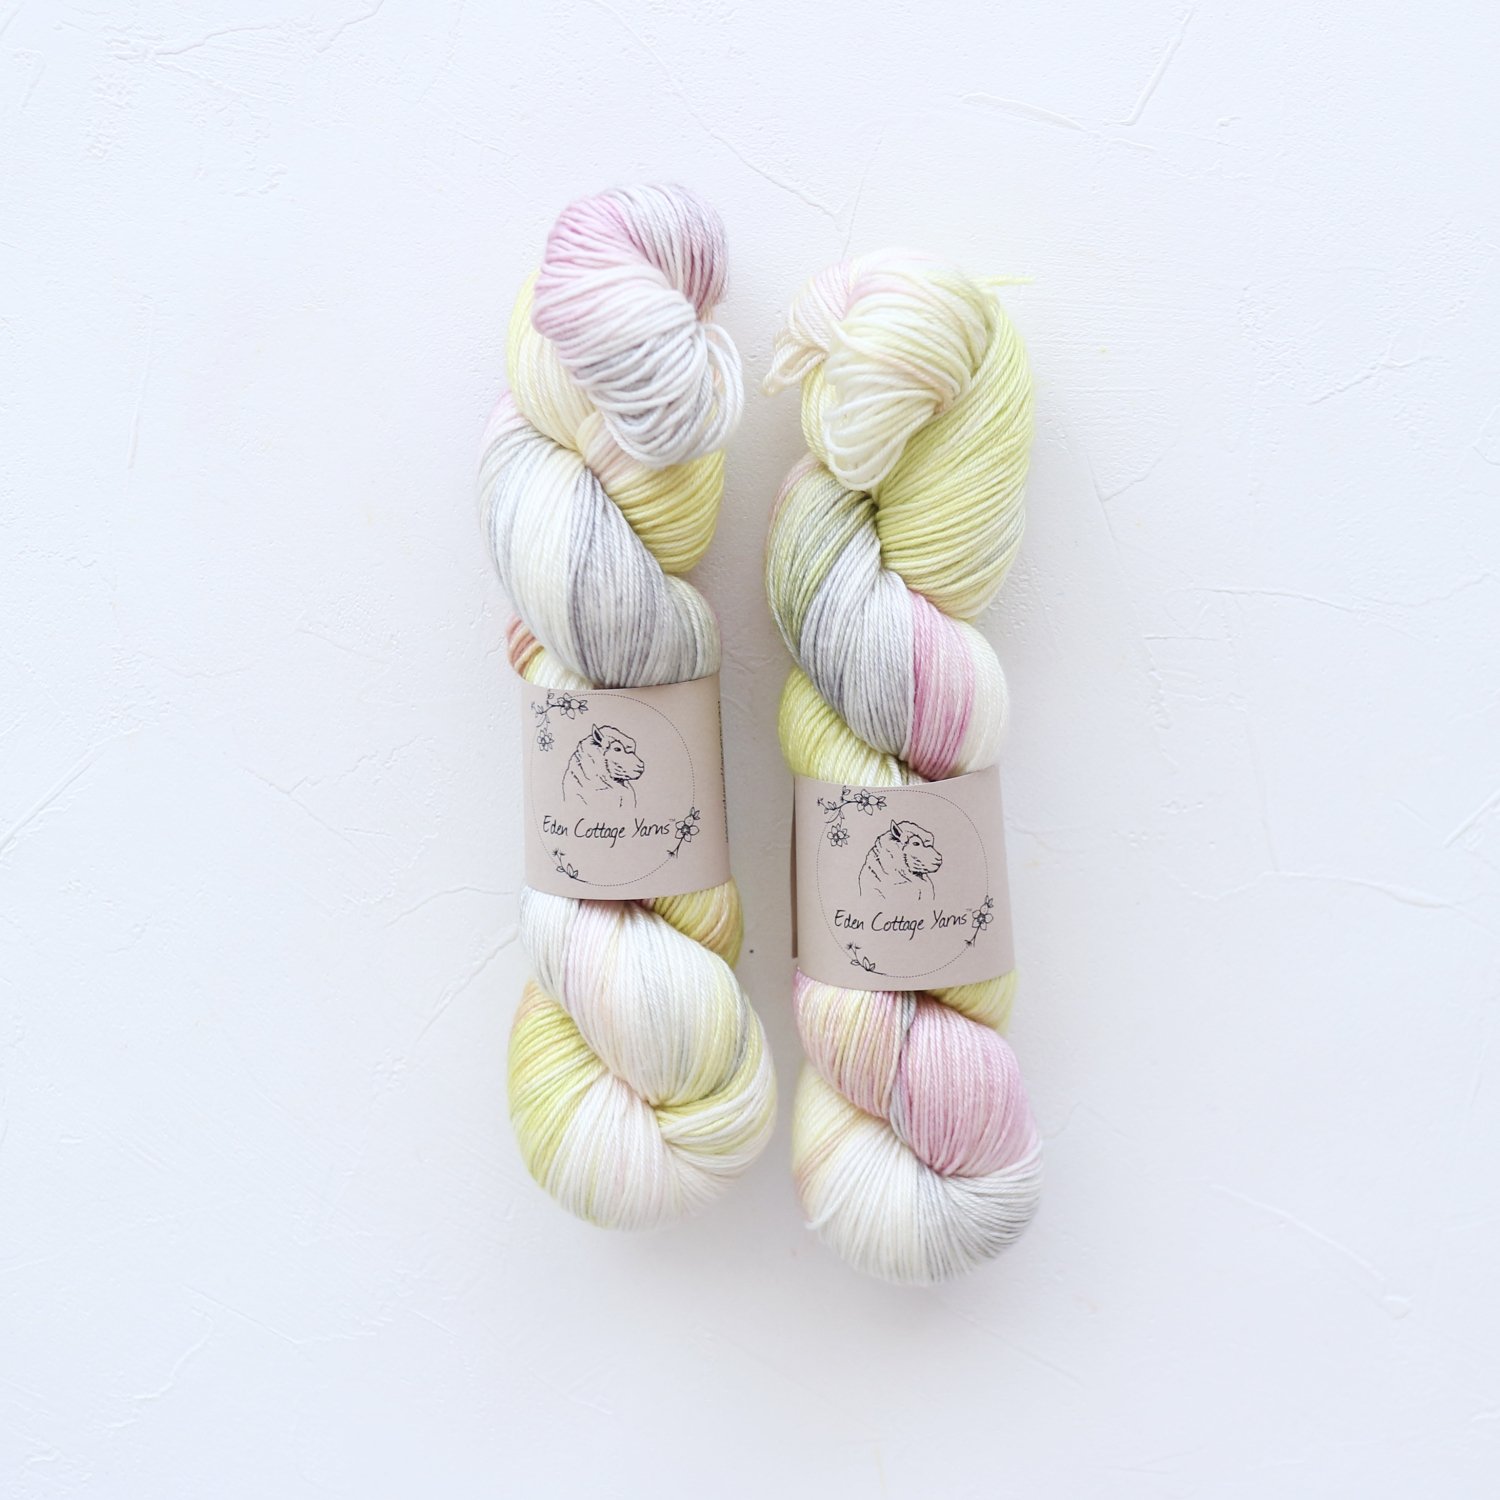 【Eden Cottage Yarns】<br>Titus 4ply<br>Cosmos Flowerbed